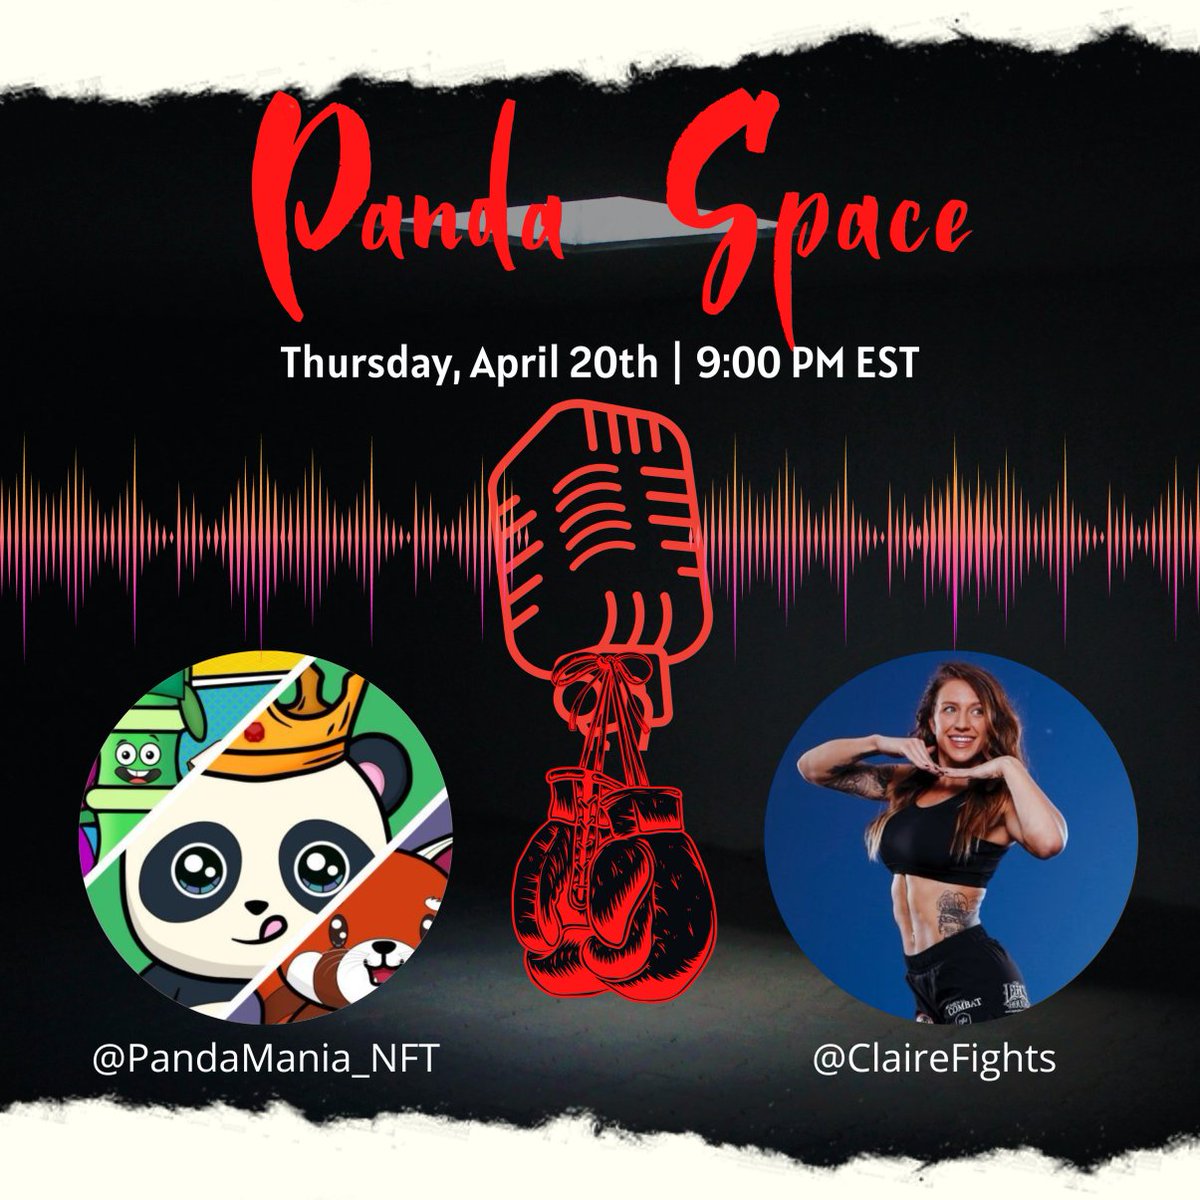 ❤️, RT & TAG 3 for chance at $10 in ETH Must follow @ClaireFights & @PandaMania_NFT MUST RSVP & BE IN SPACE: twitter.com/i/spaces/1BRJj… Let's talk MMA, health, lifestyle and more with the one and only strong and beautiful @ClaireFights 👊 #MMA